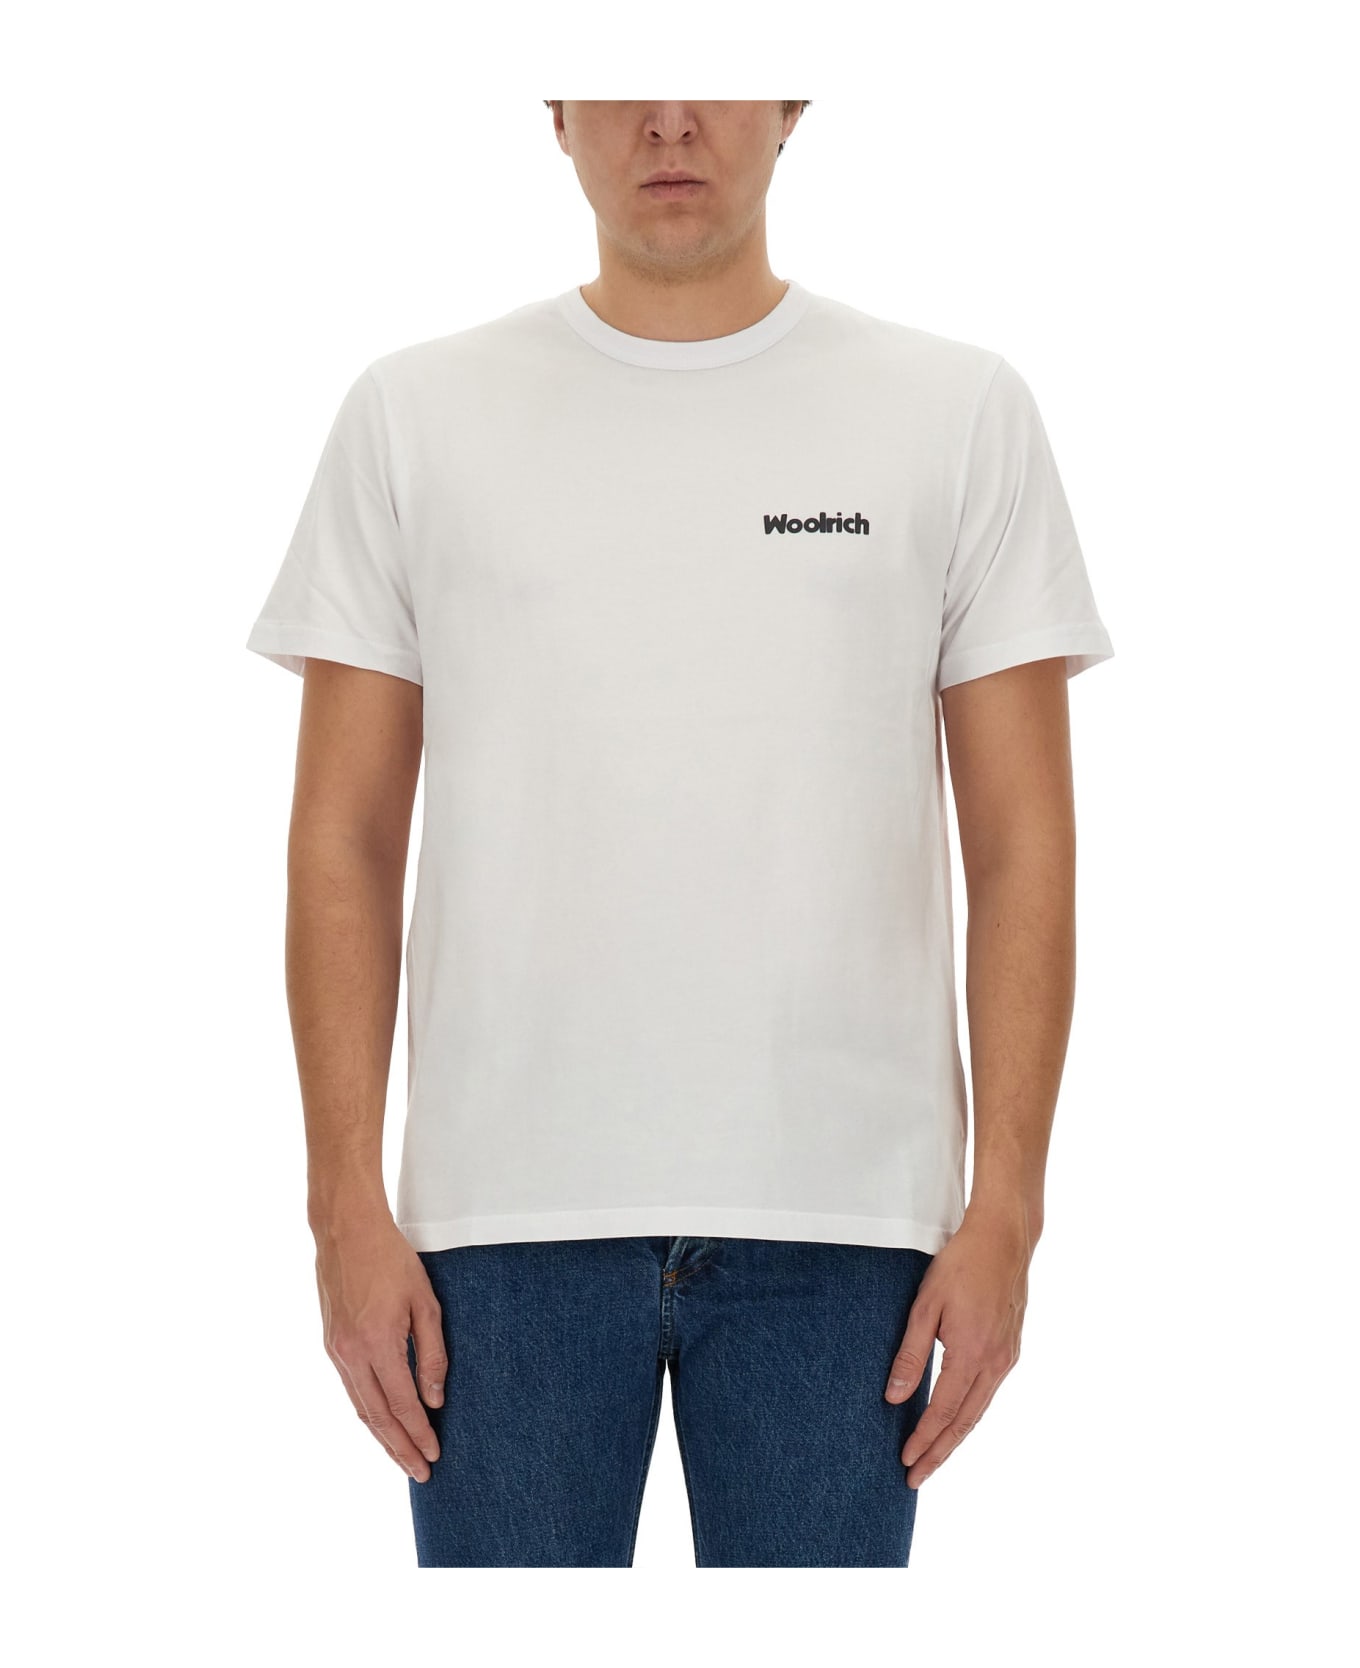 Woolrich T-shirt With Logo - White